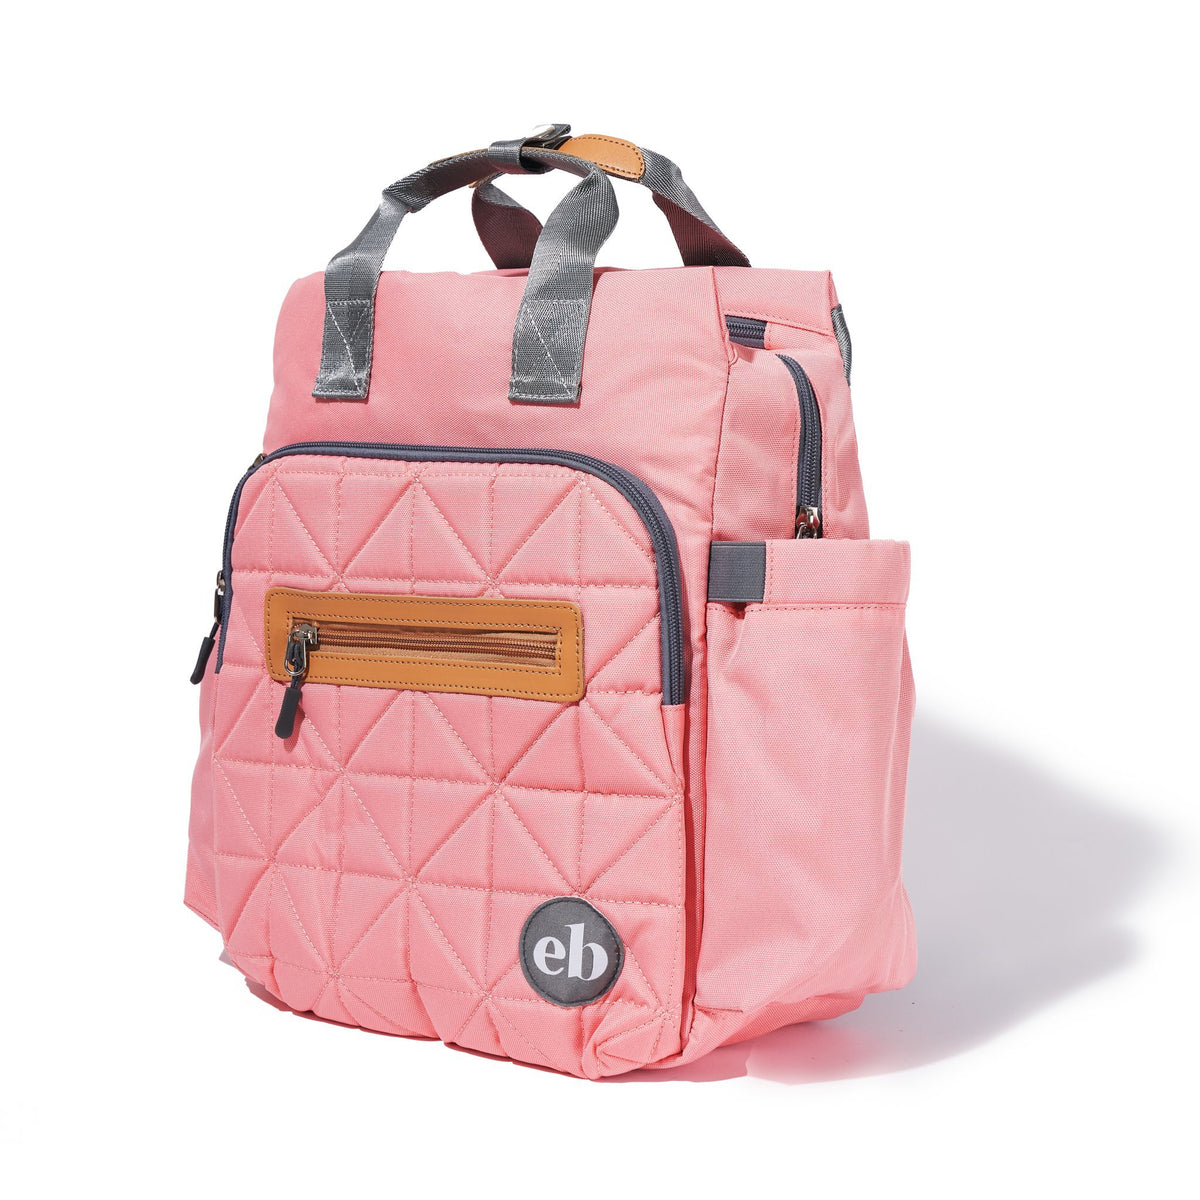 Diaper Bags All Baby Feeding | Nordstrom